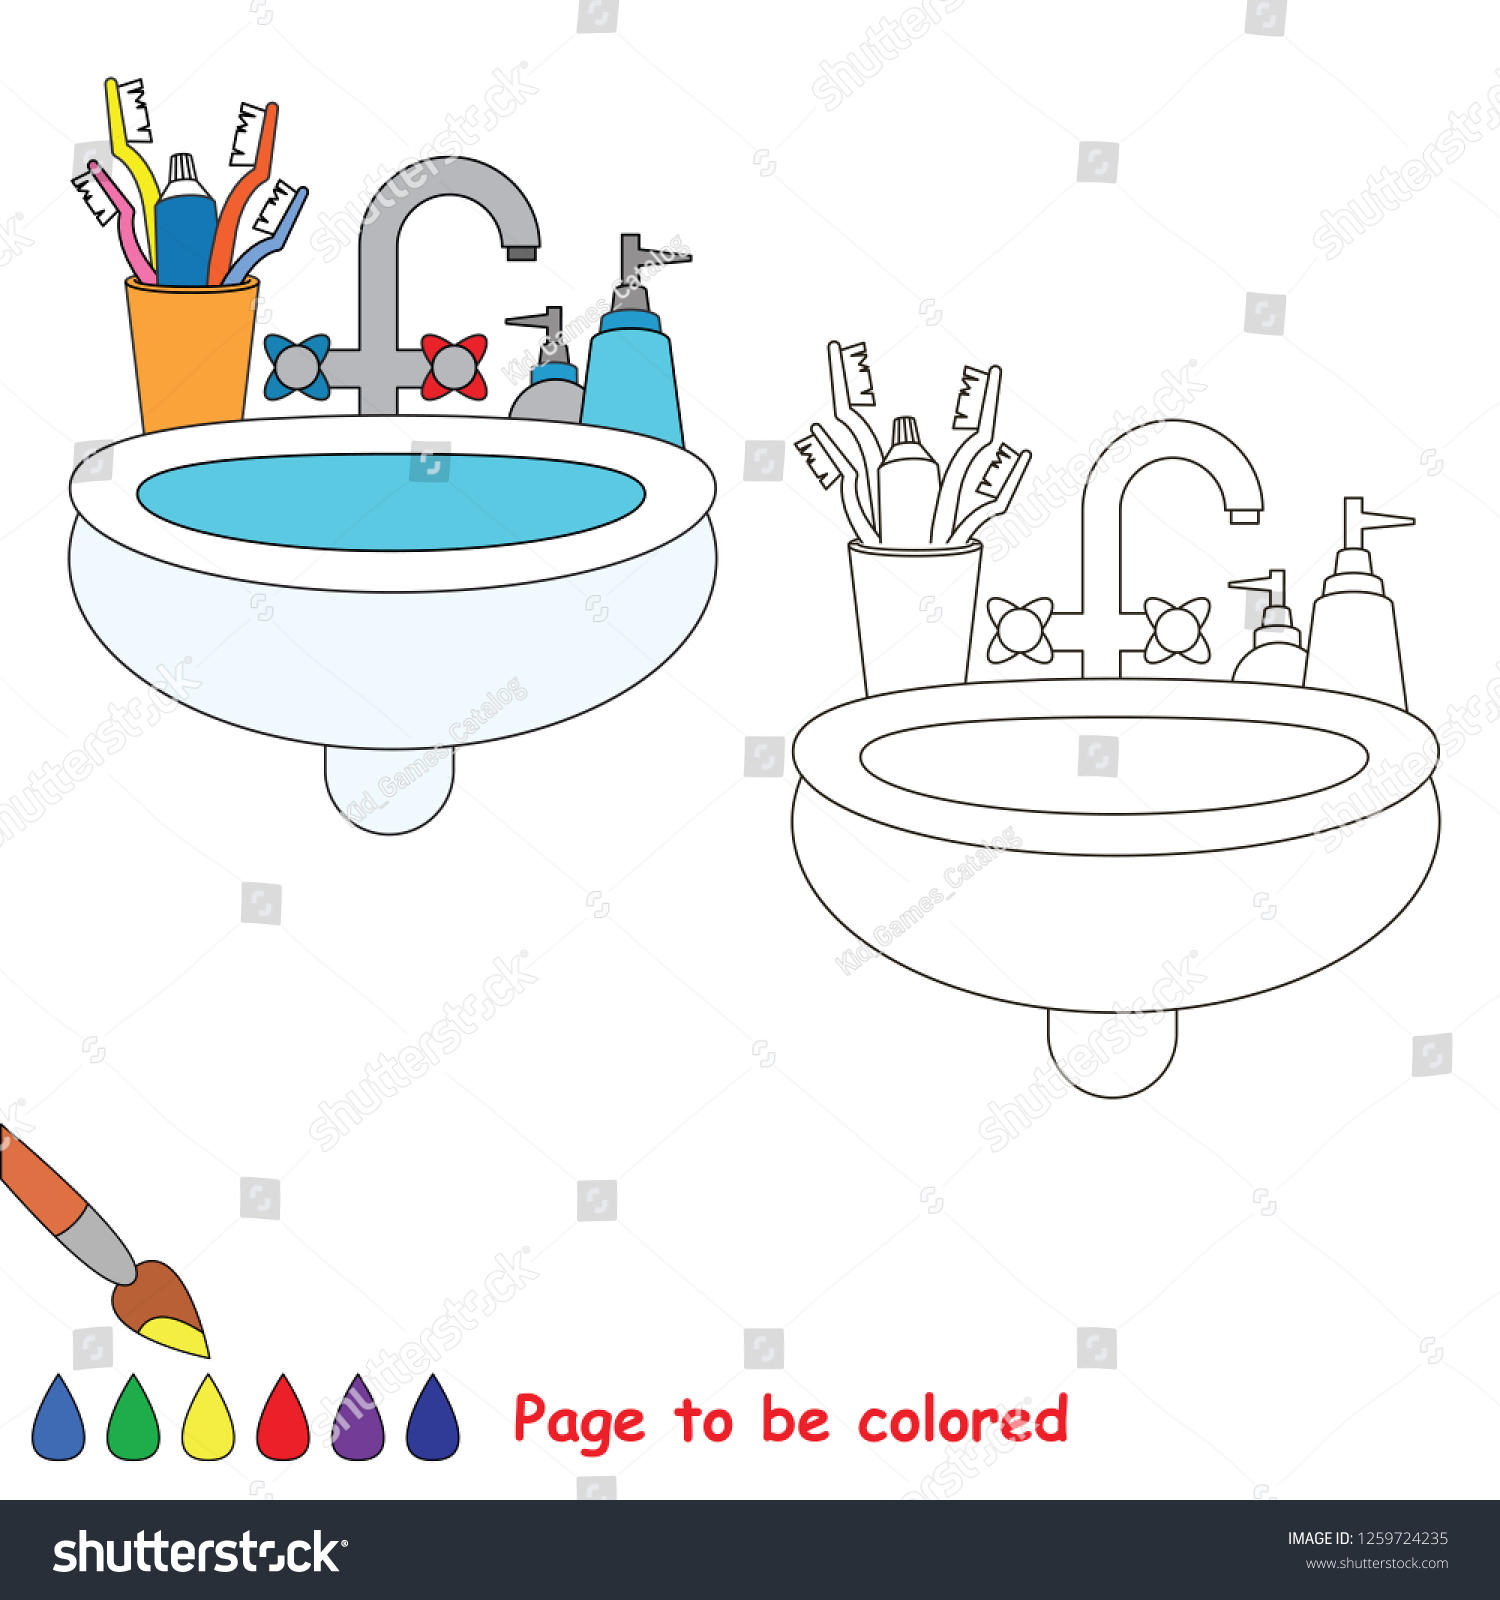 Bath sink be colored coloring book stock vector royalty free